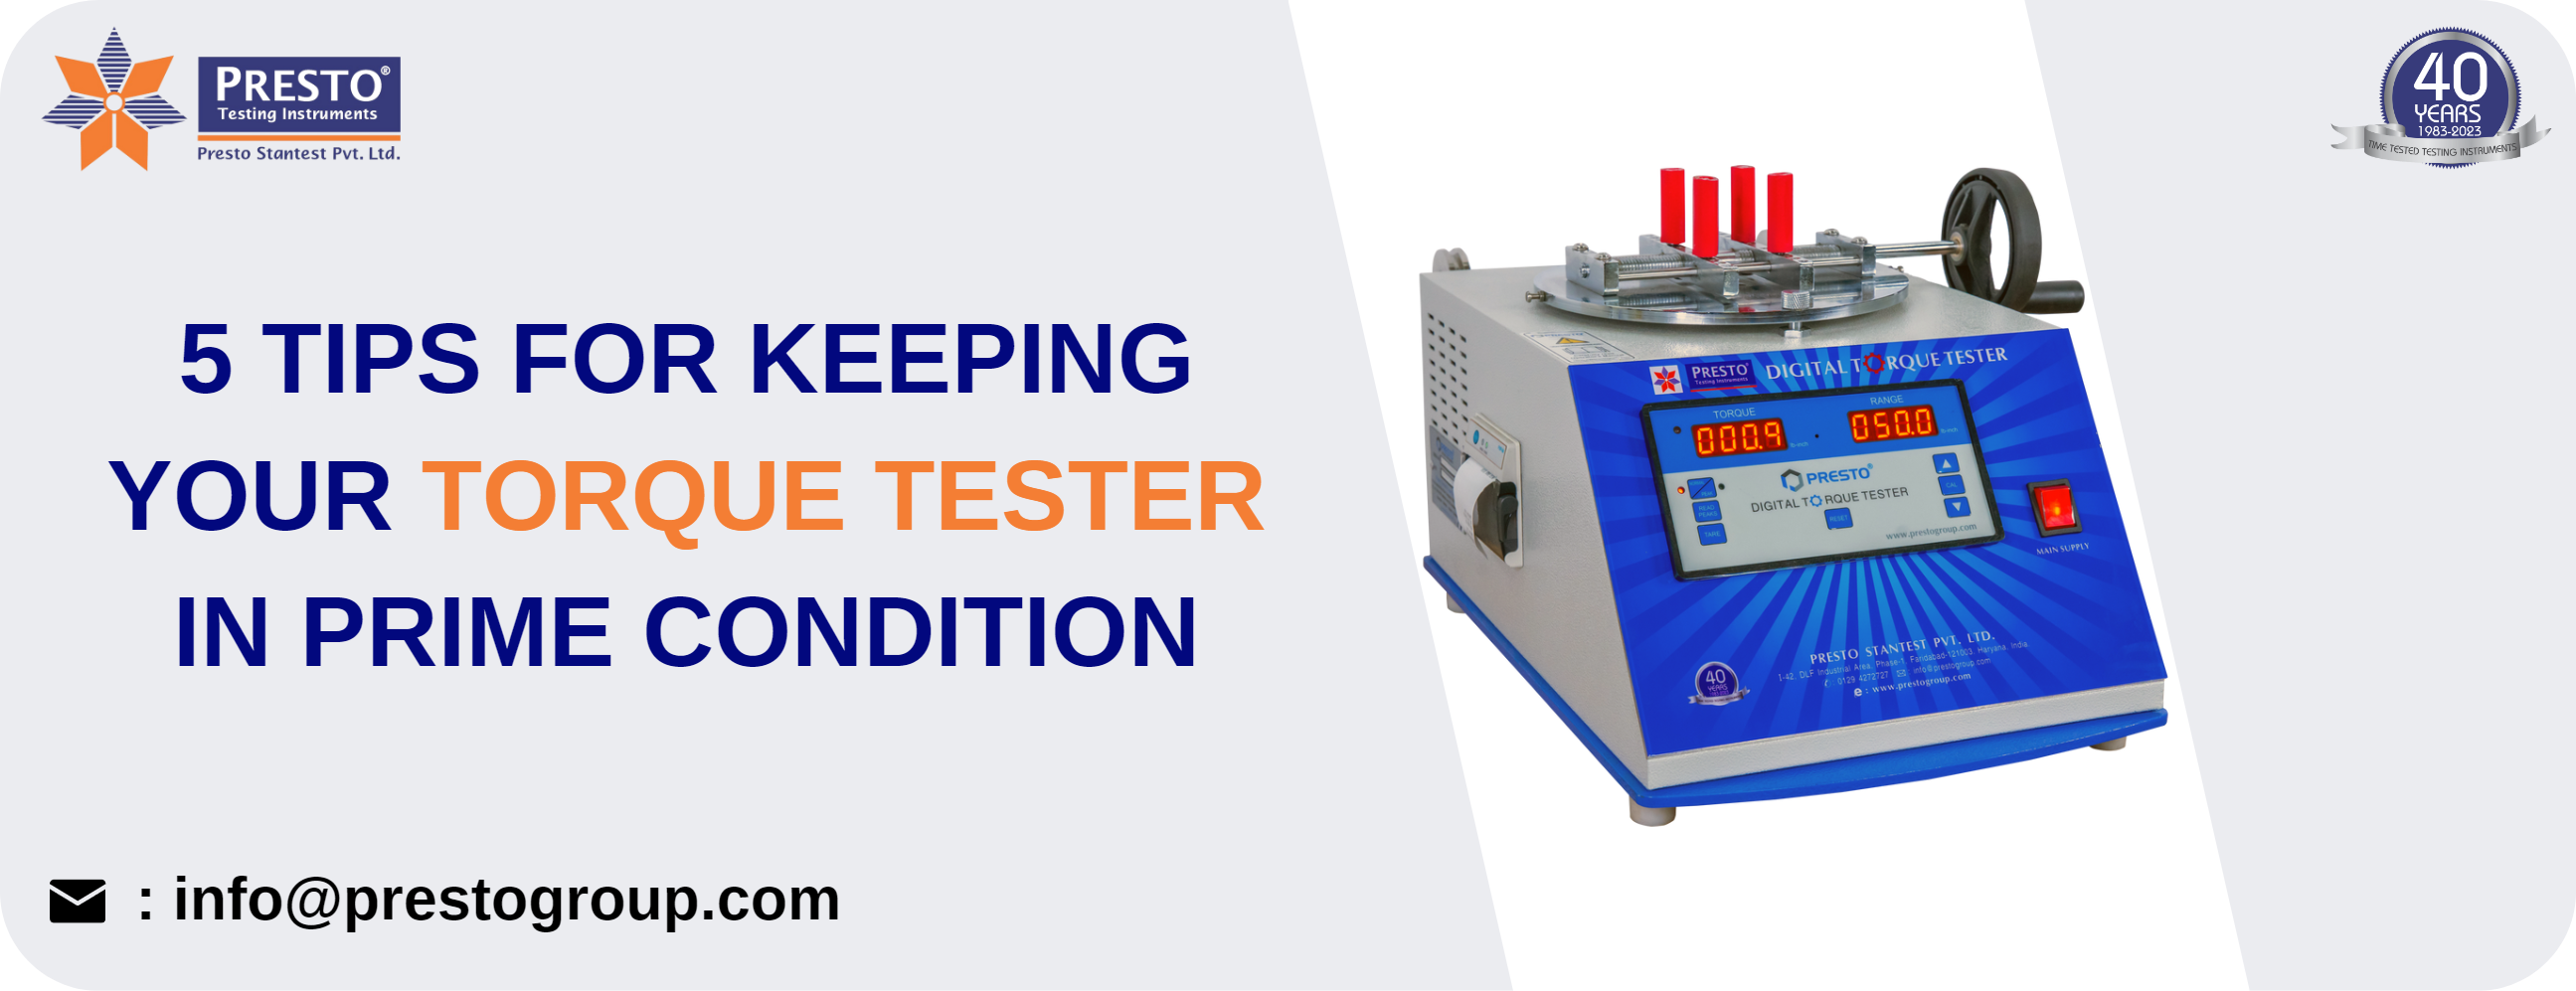 5 Tips for Keeping Your Torque Tester in Prime Condition